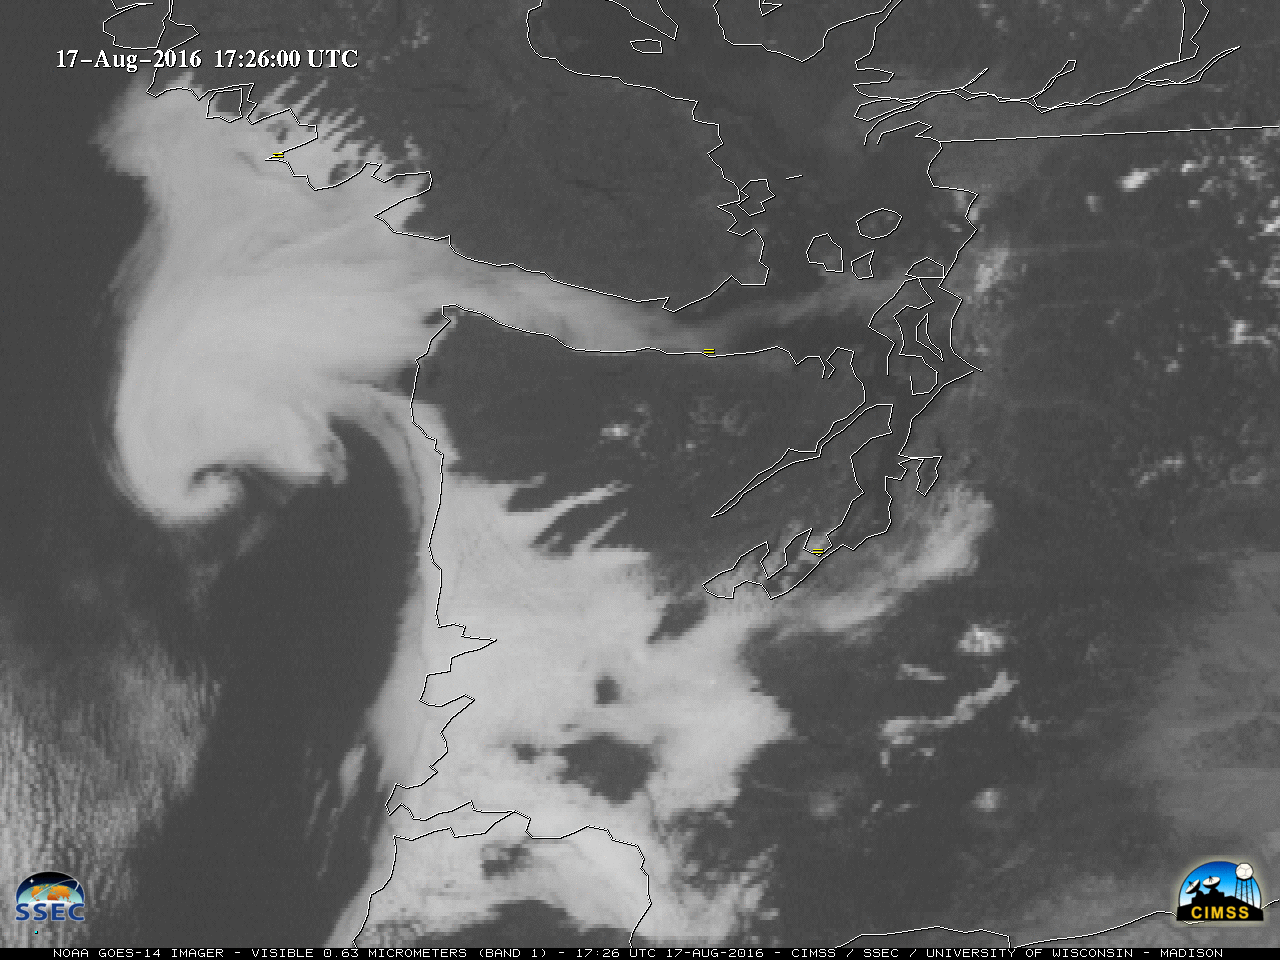 GOES-14 Visible (0.63 µm) images, with hourly surface weather symbols plotted in yellow [click to play MP4 animation]